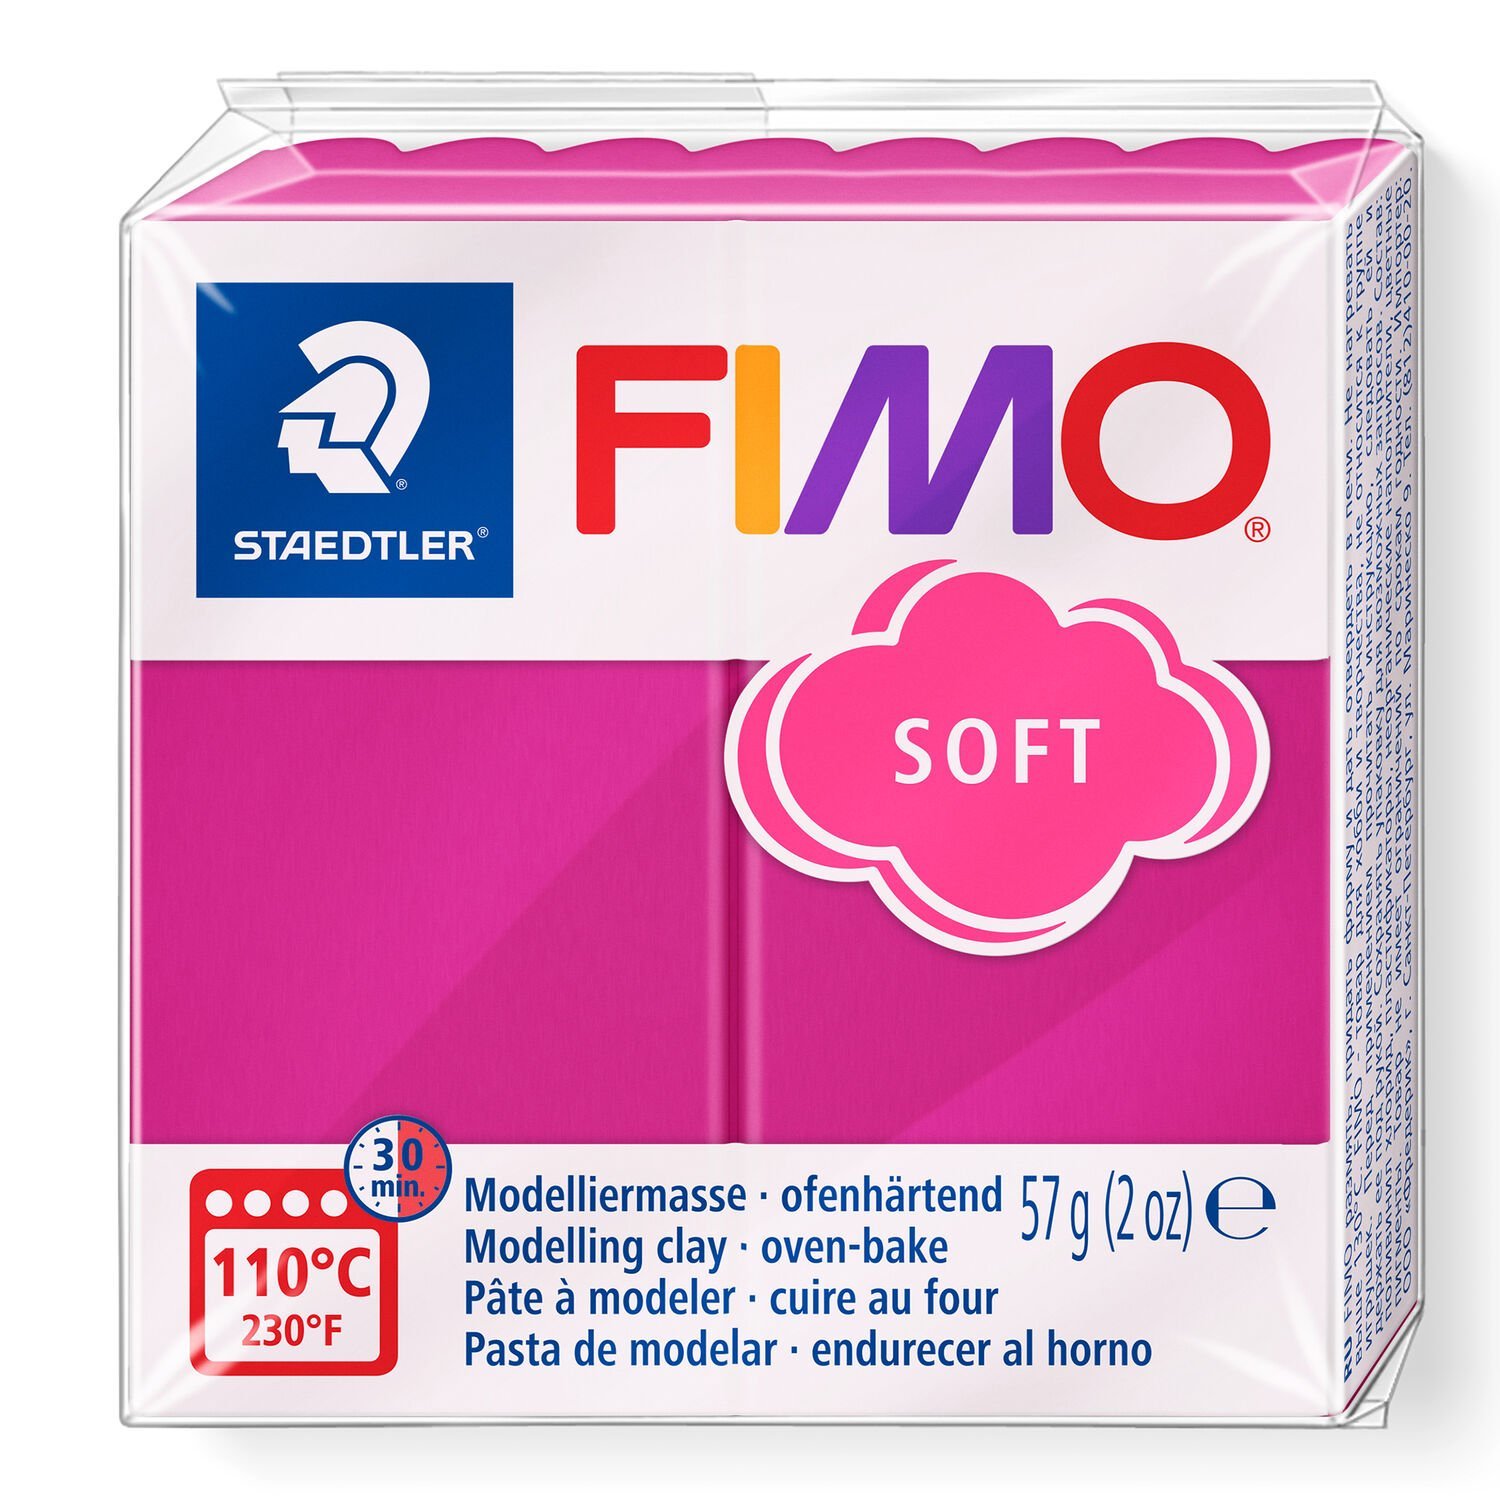 FIMO® soft 8020 - Oven-bake modelling clay